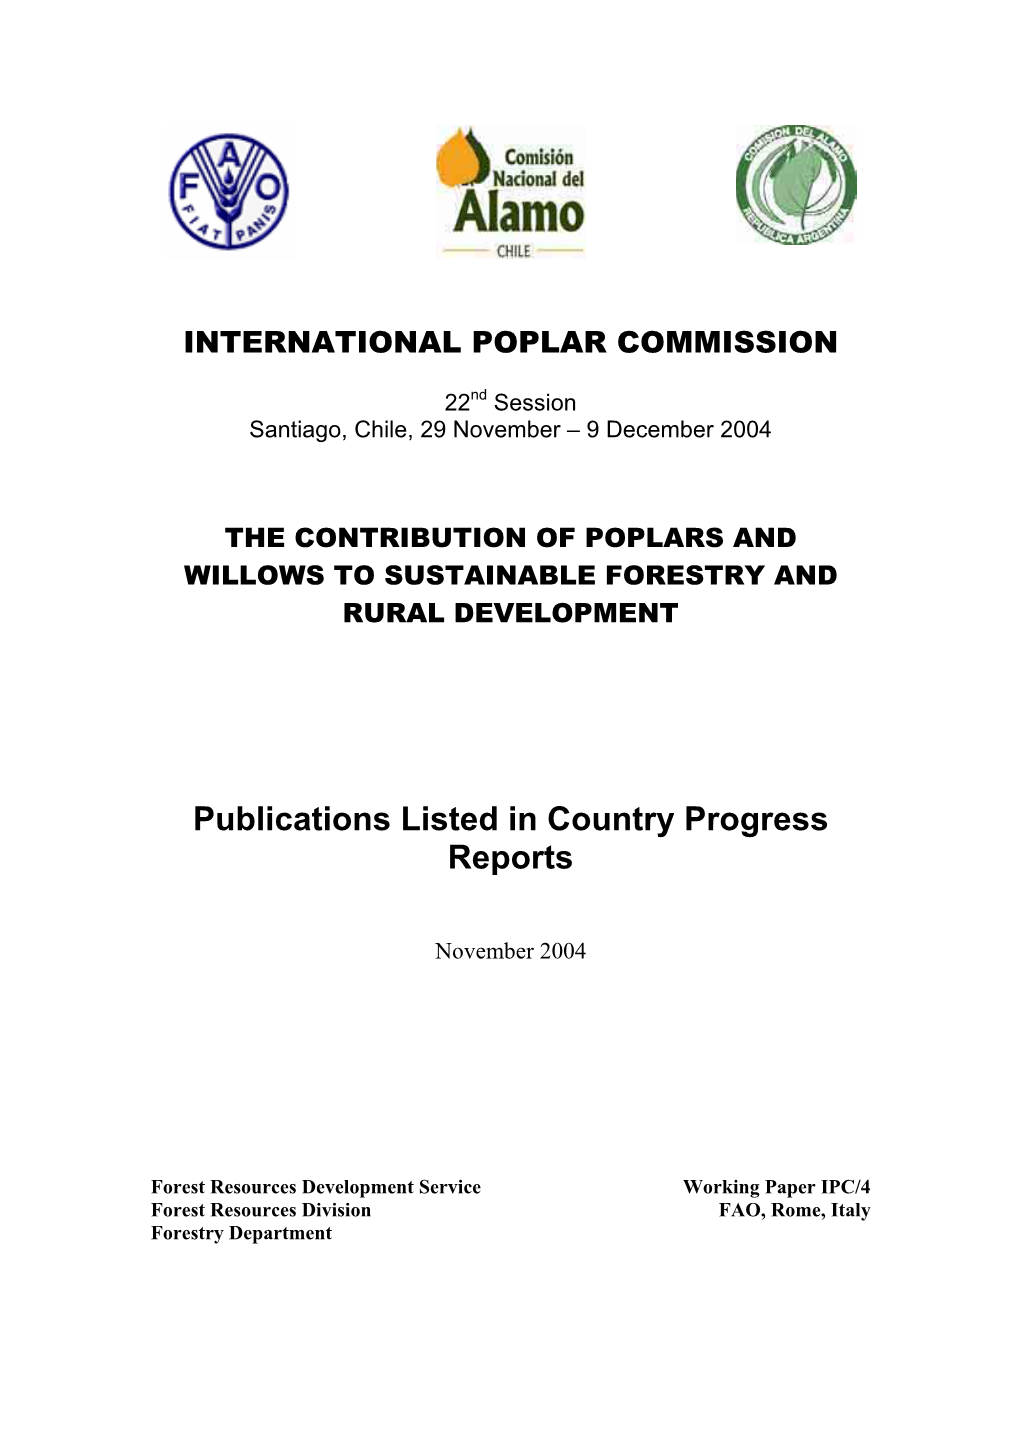 Publications Listed in Country Progress Reports